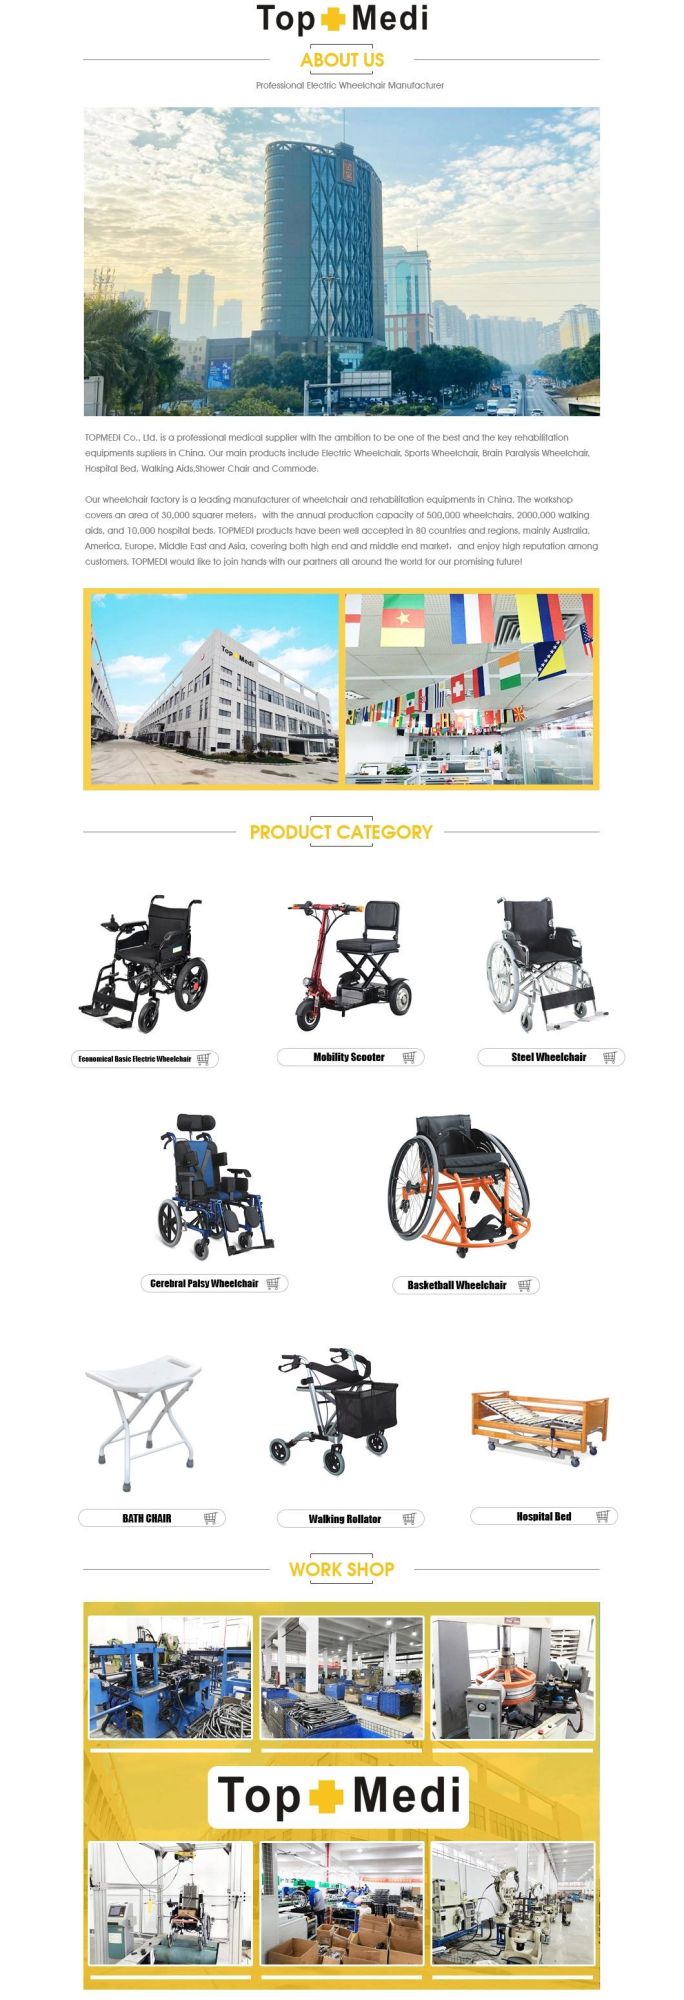 Topmedi Hotsales Foldable Aluminum Manual Wheelchair with Quick Released Wheels